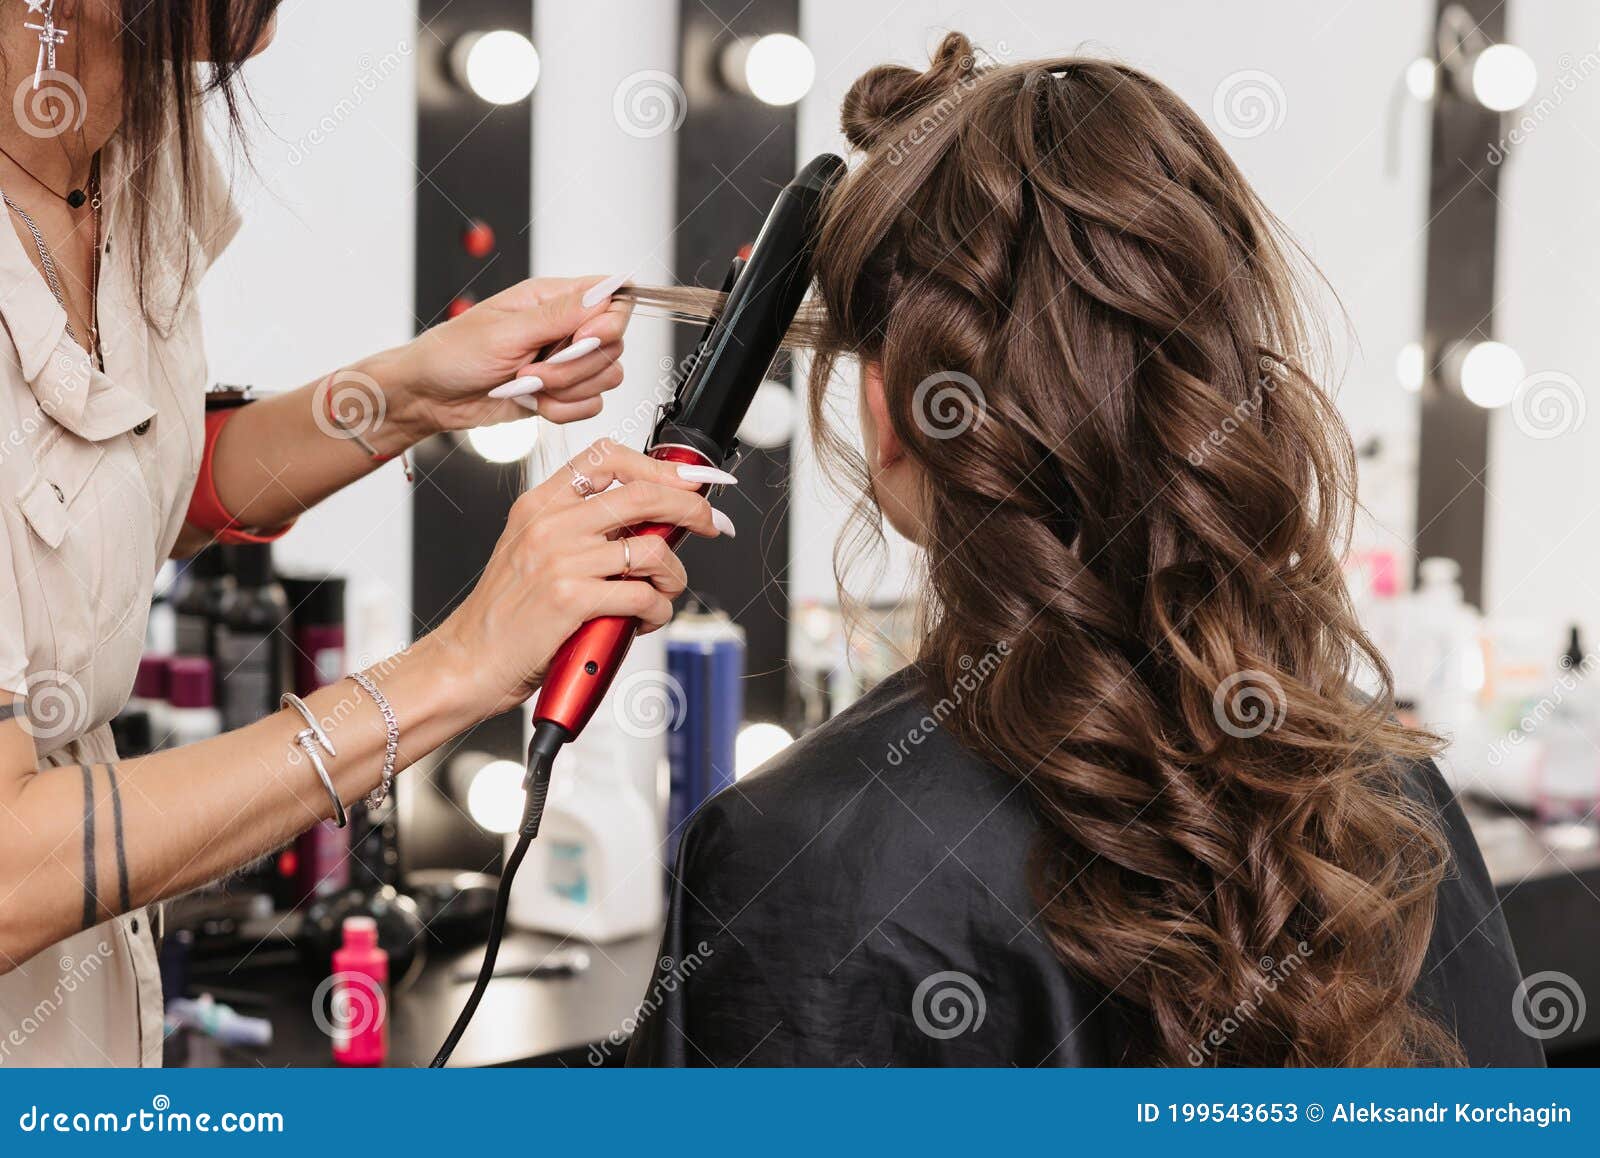 Hands of a Hairdresser with a Curling Iron Making a Hairstyle for a Curly  Girl Stock Image - Image of curls, hairstyling: 199543653